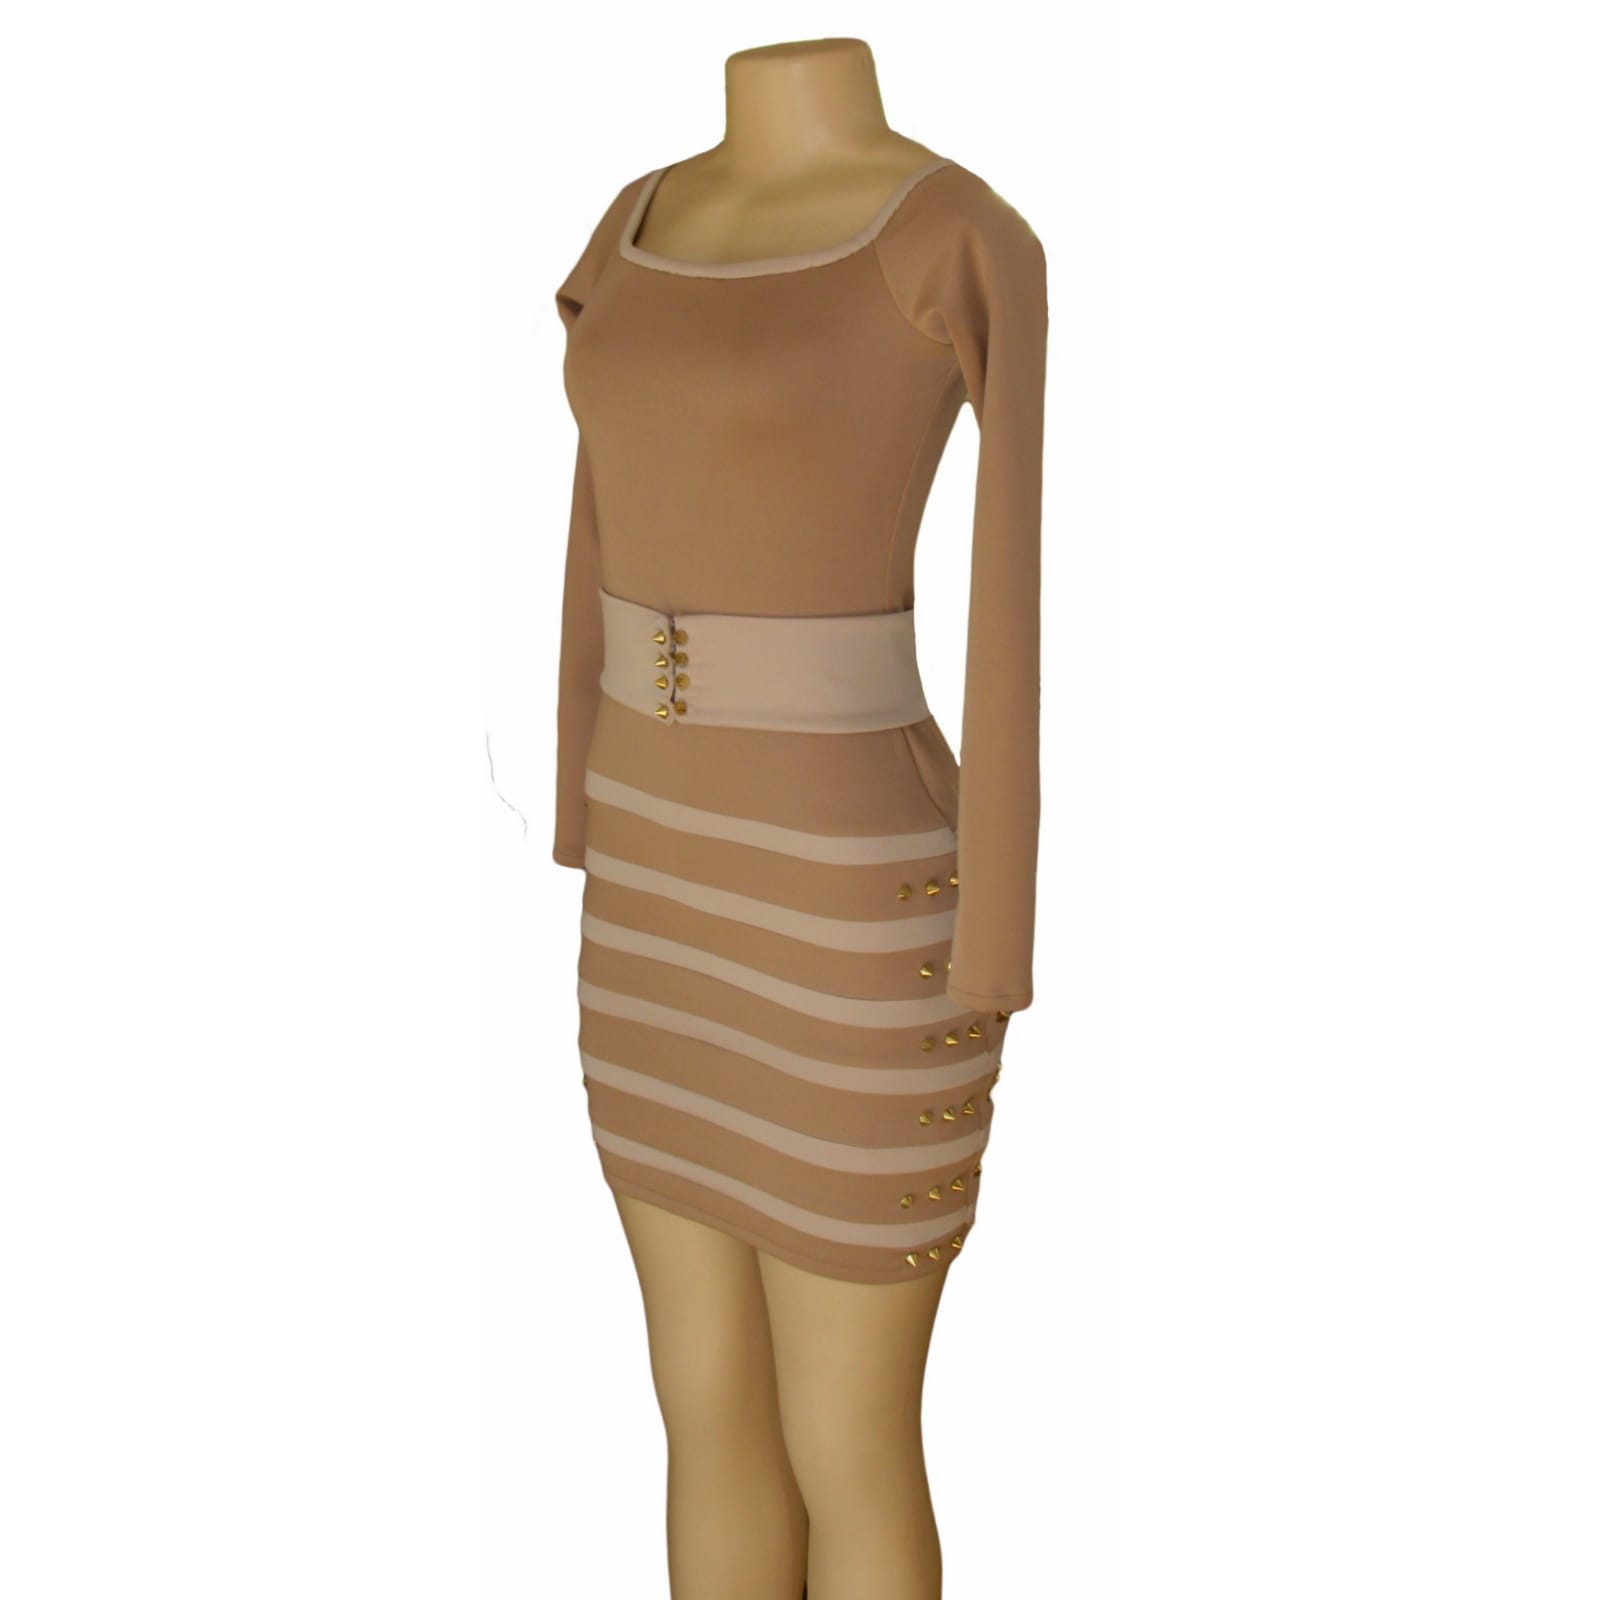 Nude and tan tight fitting short evening dress 1 nude and tan tight fitting short evening dress with a square neckline, long sleeves, a removable belt, detailed with gold spiked studs.